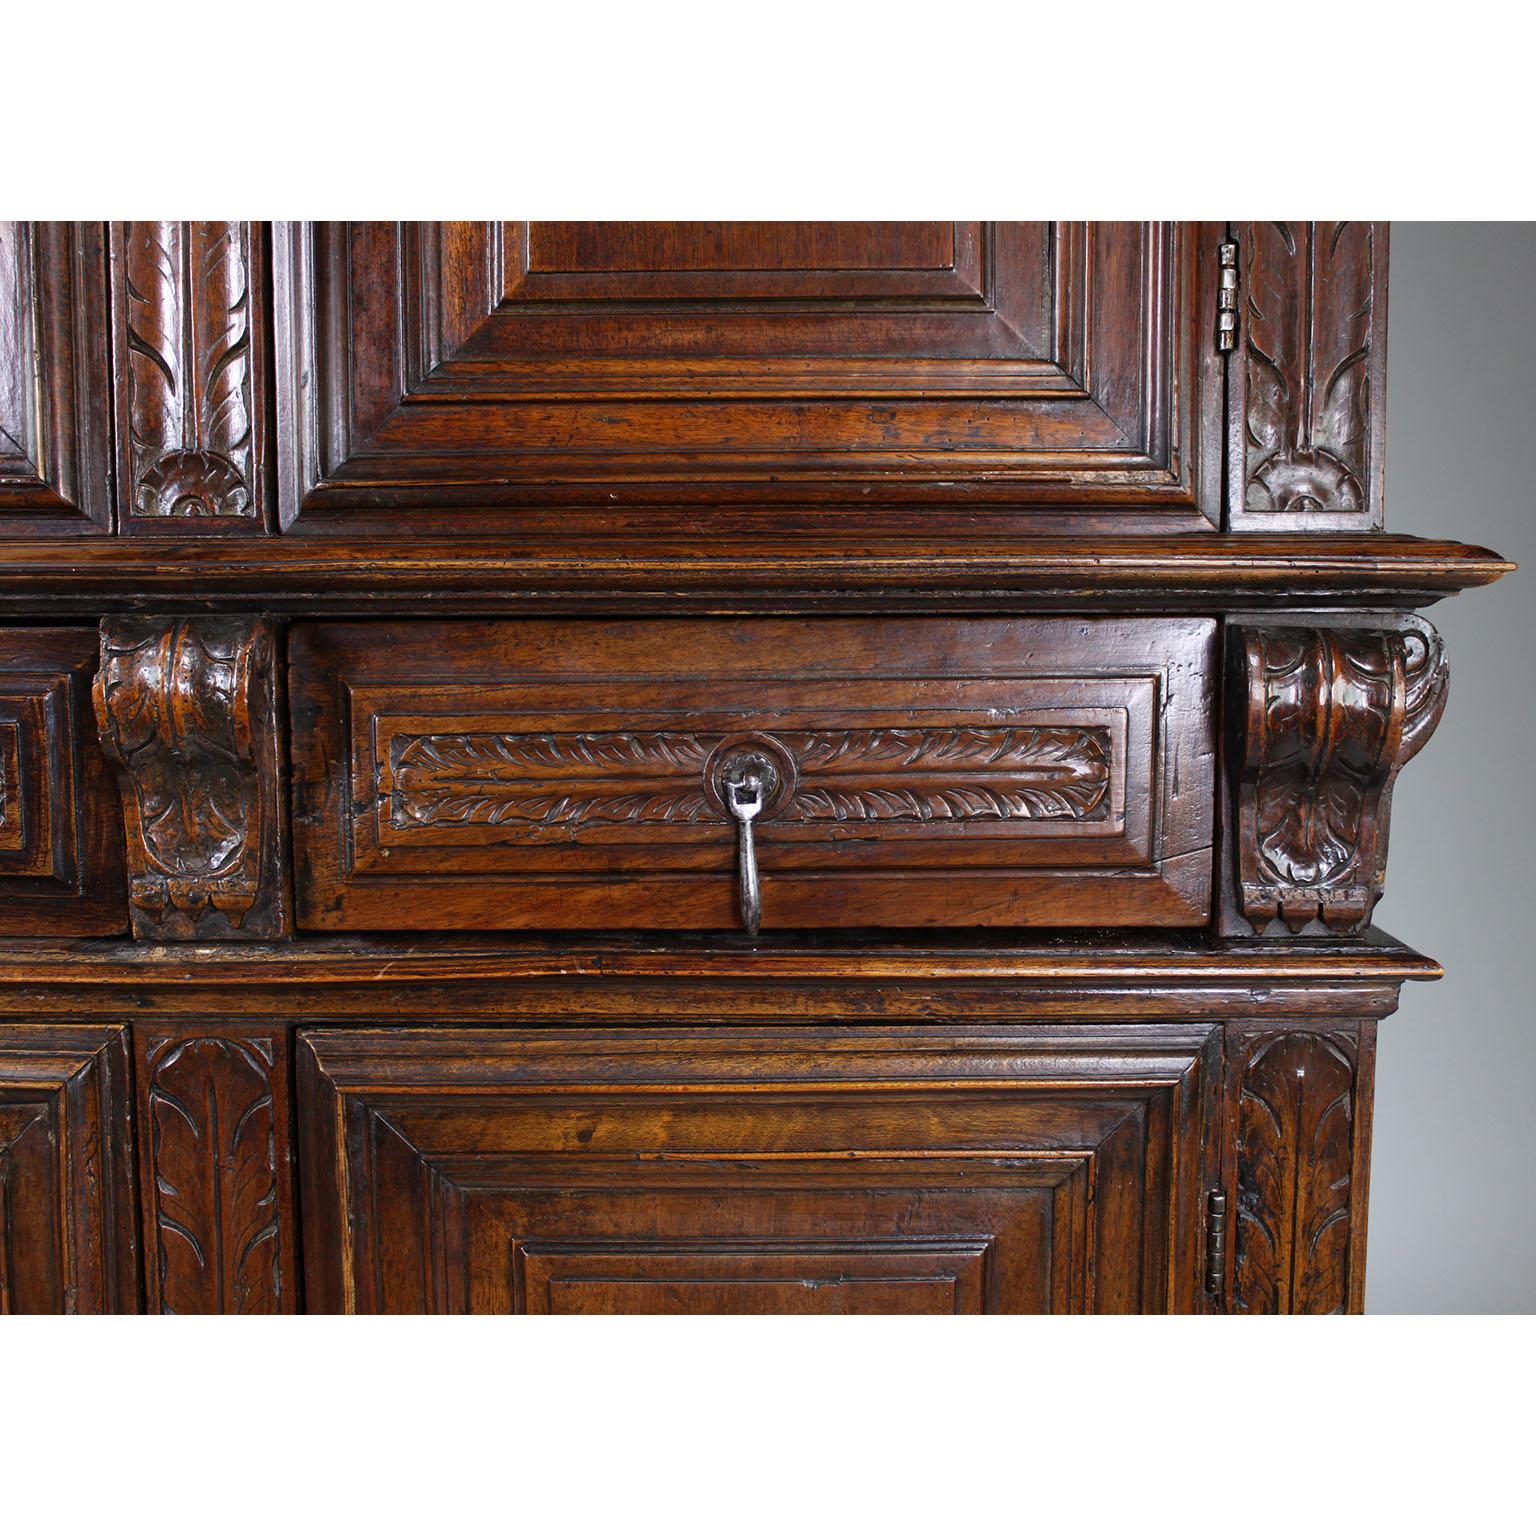 A 17th-18th Century French/Italian Renaissance Walnut Carved Credenza Cabinet For Sale 2